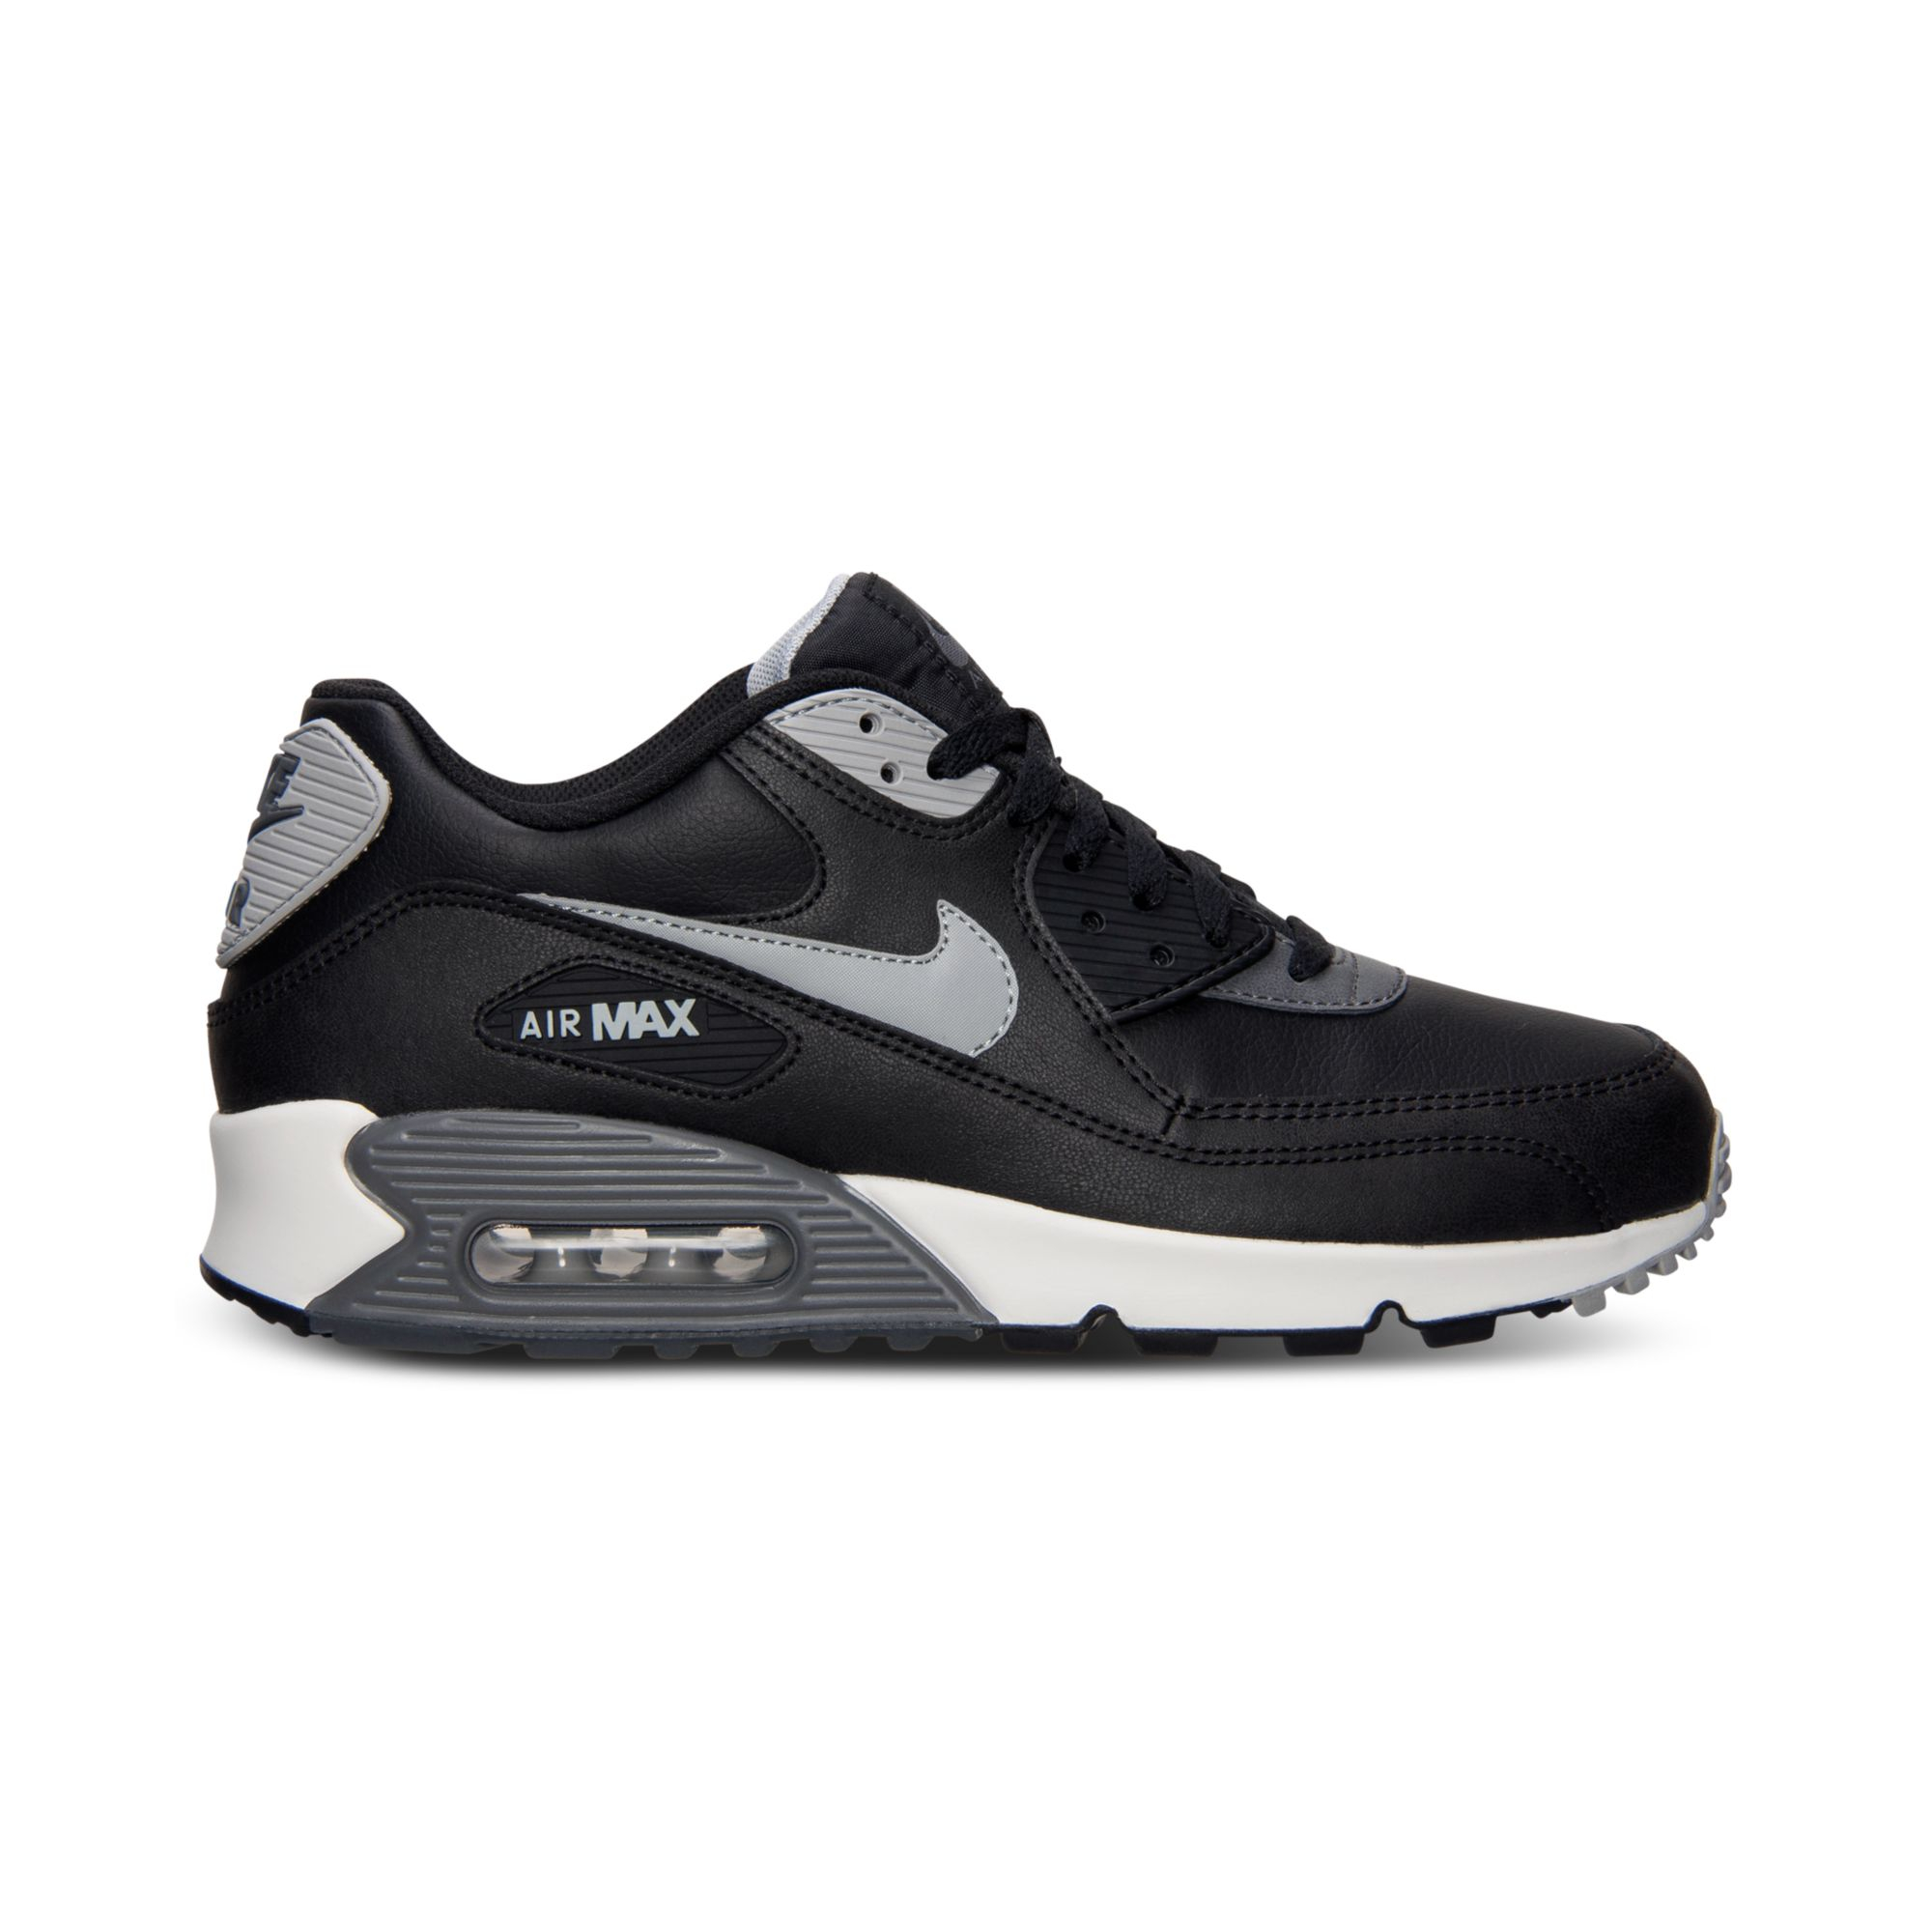 Lyst - Nike Mens Air Max 90 Essential Running Sneakers From Finish Line in Black for Men